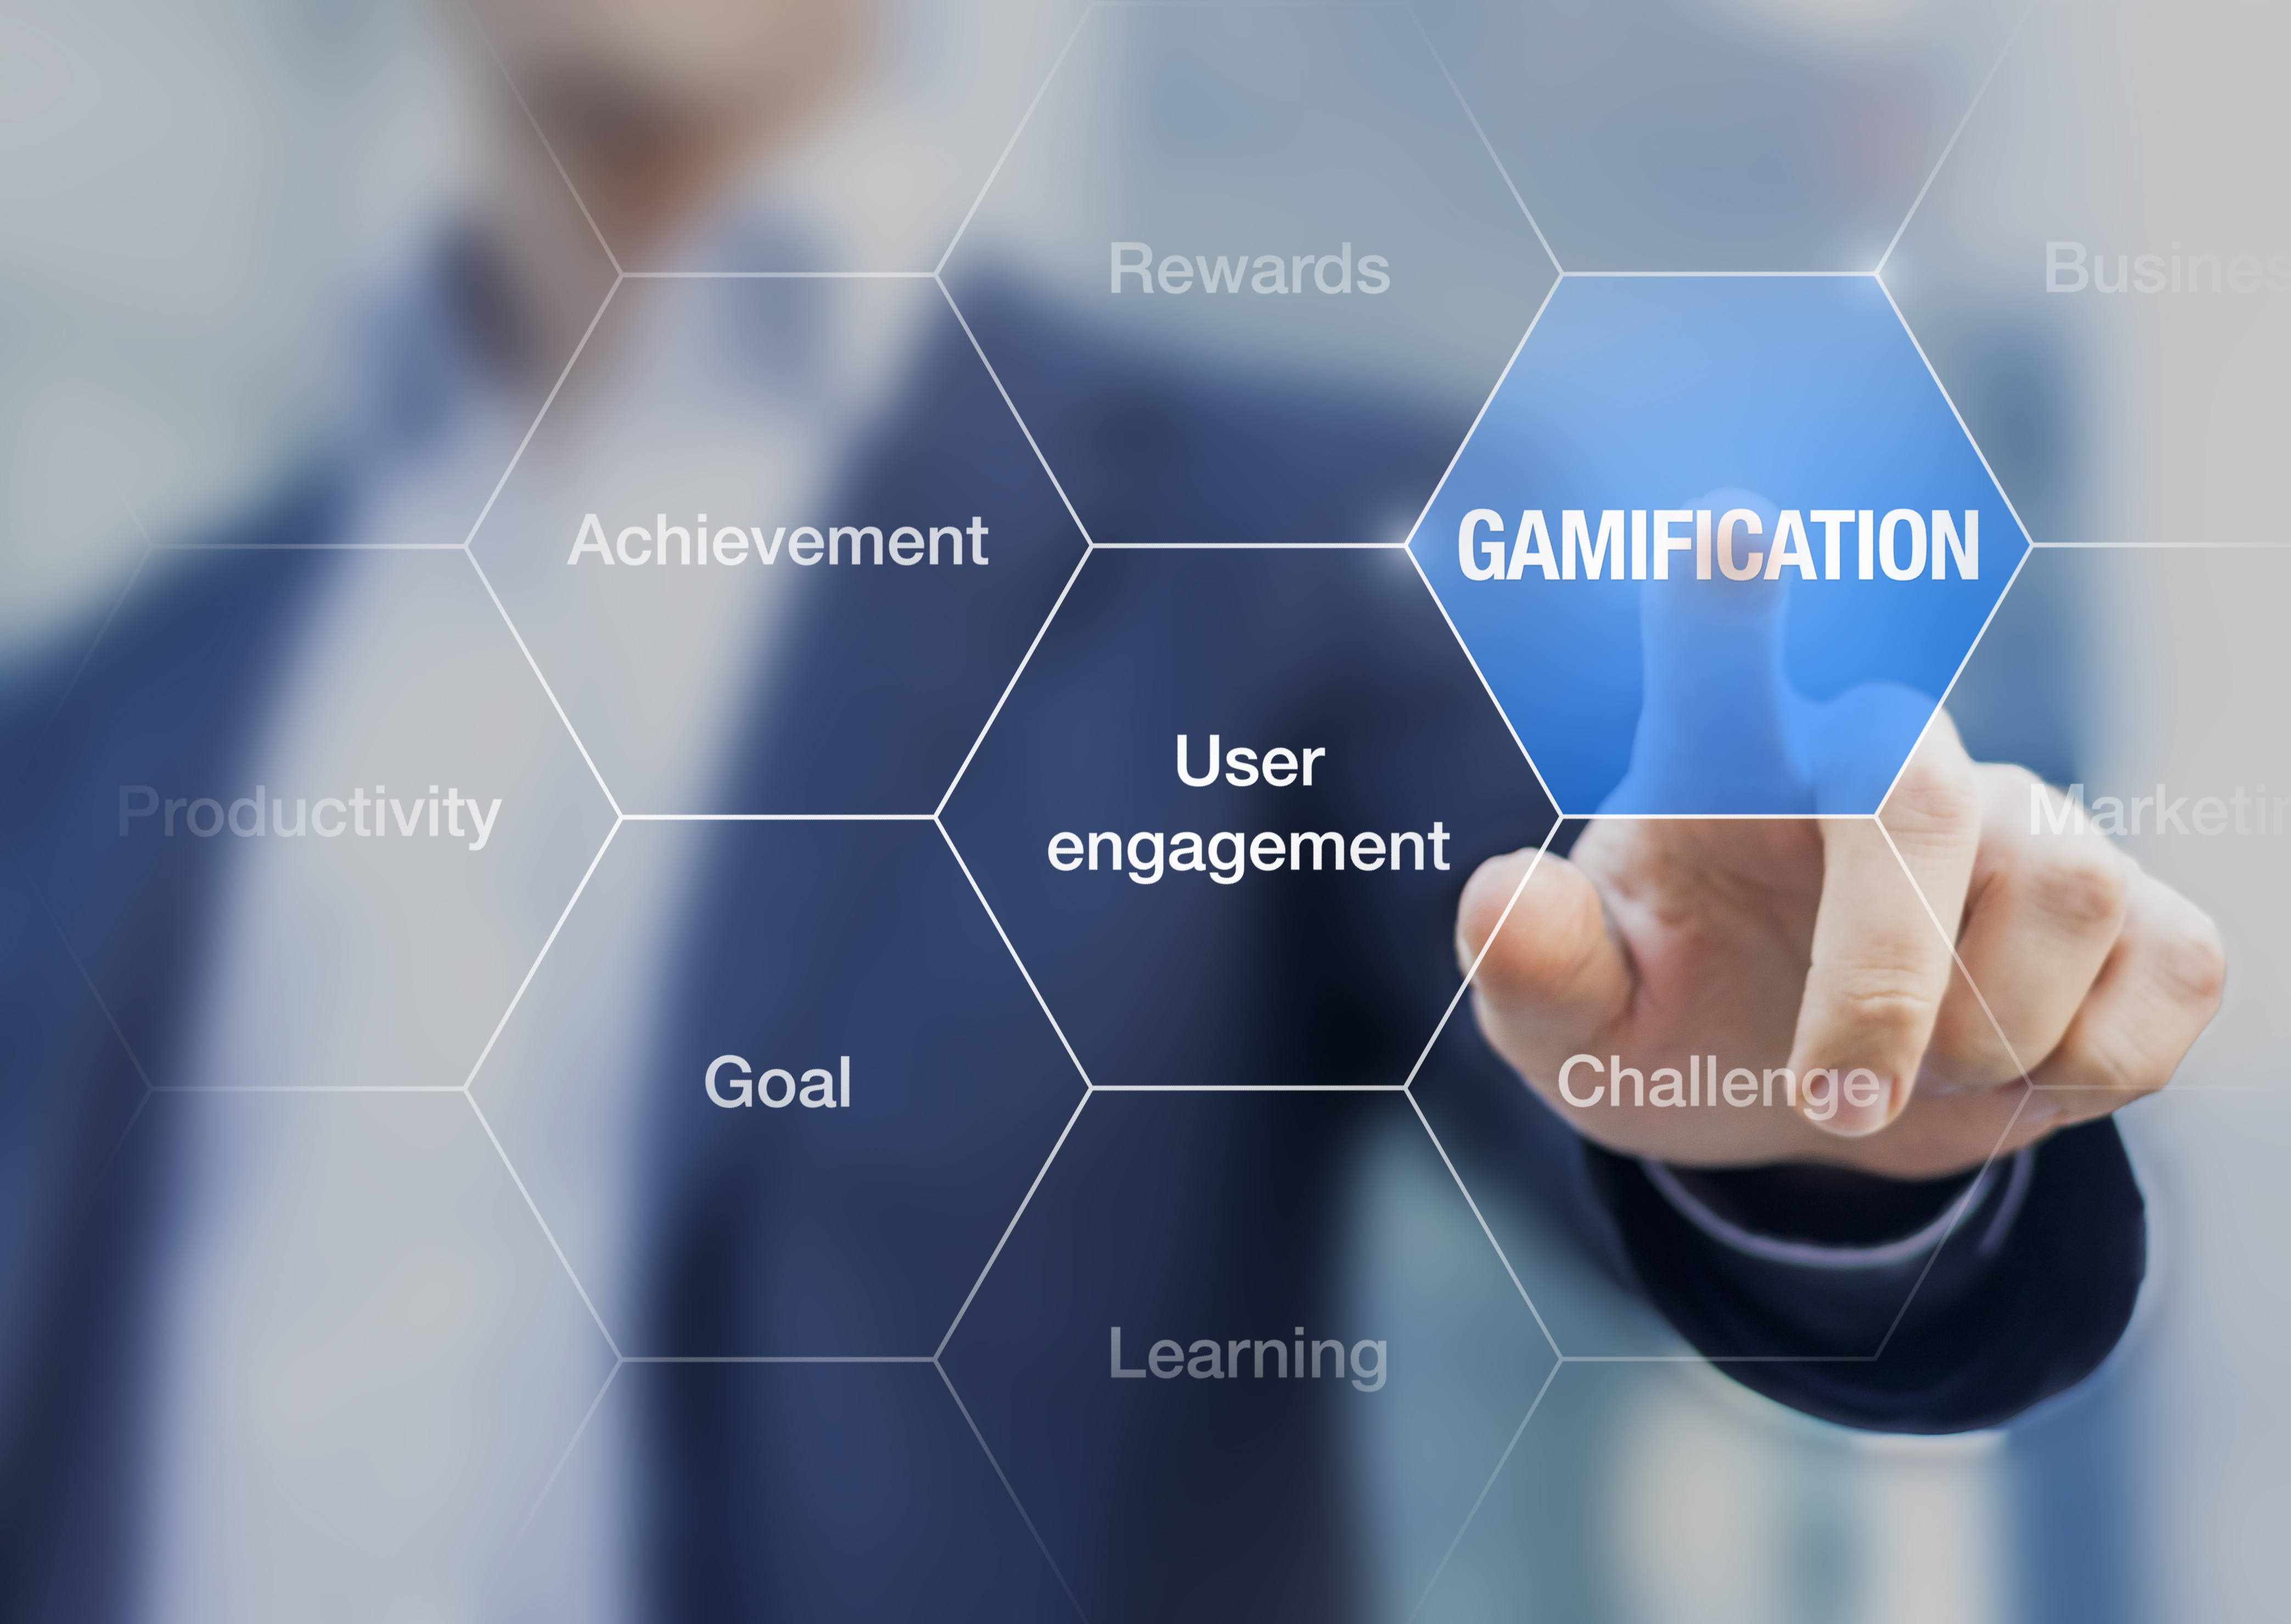 Image of a business man pointing at the word Gamification, user engagement, learning, etc.